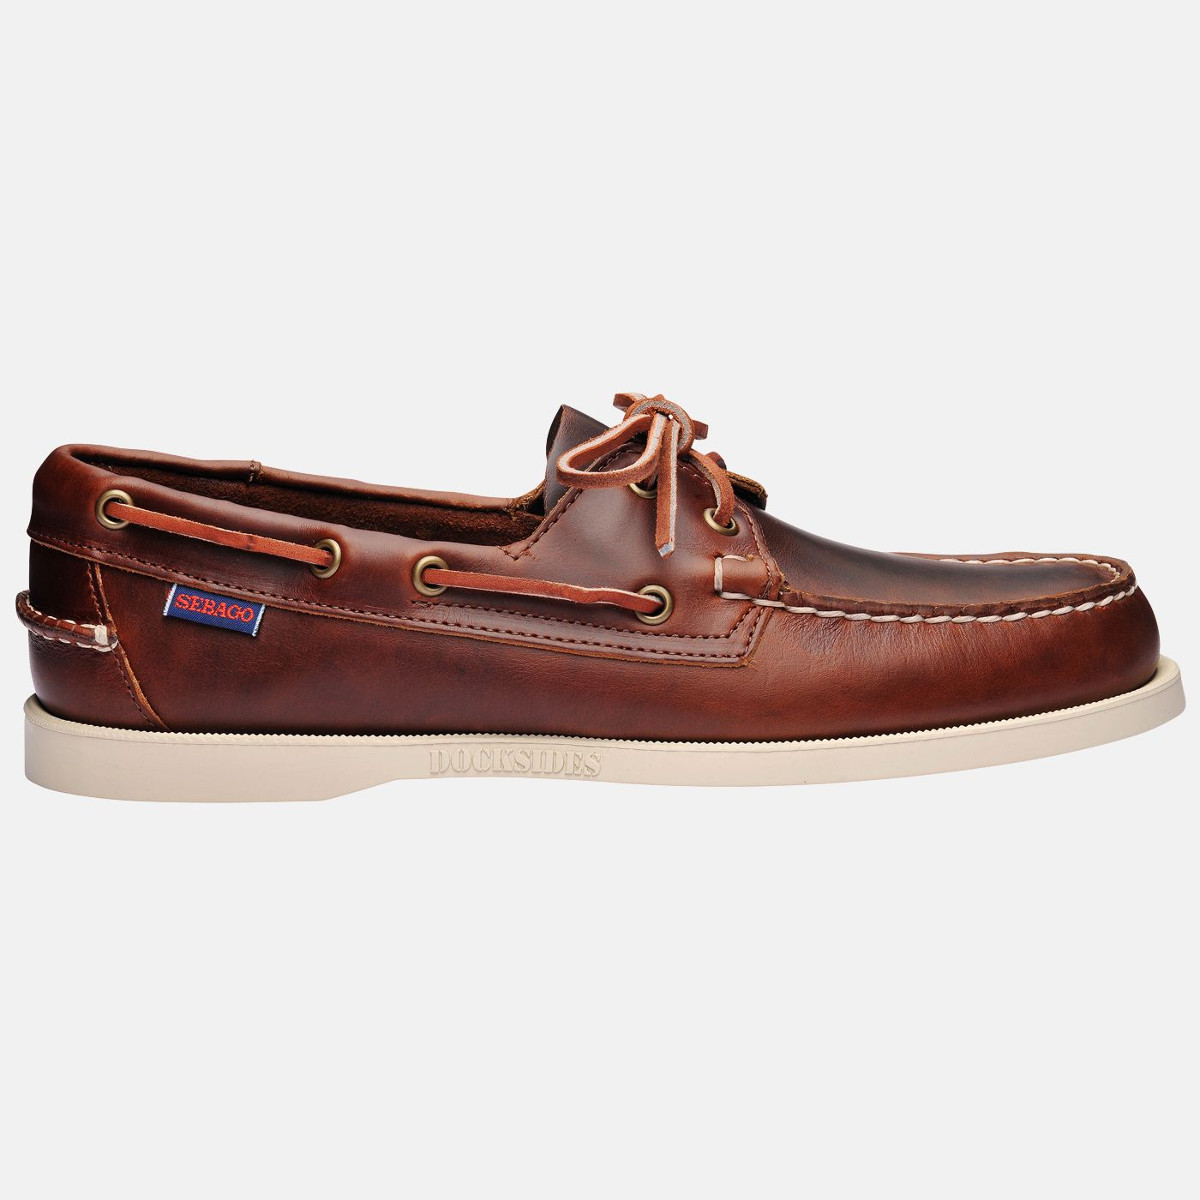 Sebago Docksides chaussures bateau homme brown oiled waxy leather, taille EU 47 (US 12,5)